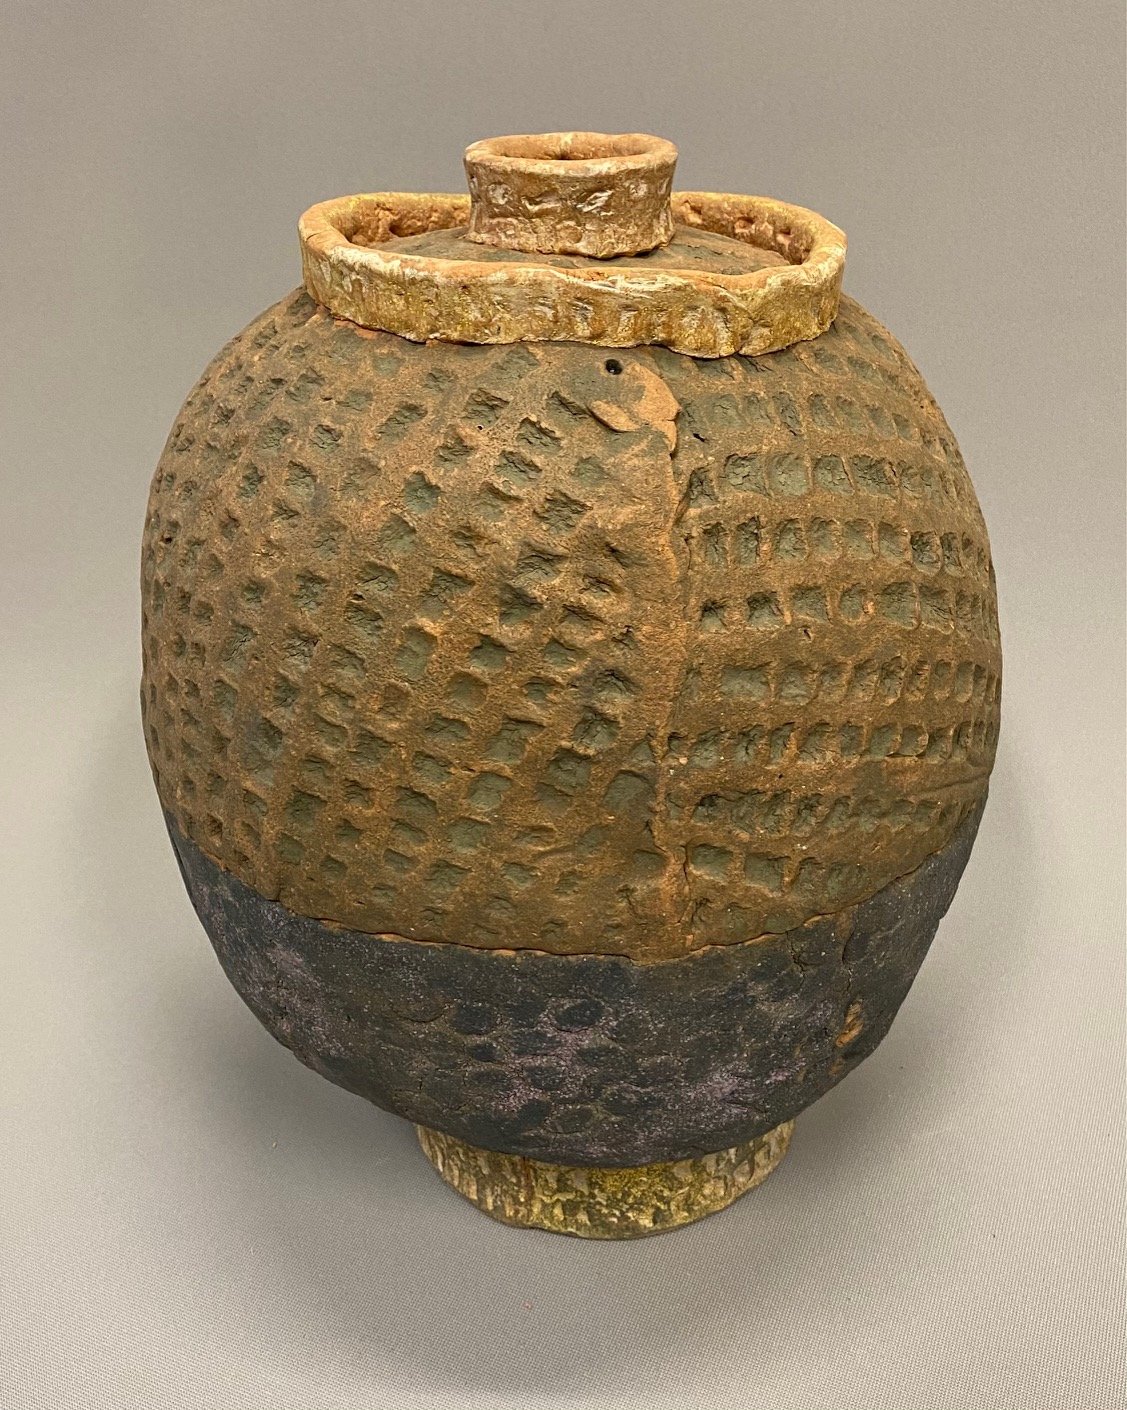 Lidded Jar by Ron Michael  earthenware and limestone  13 x 8 x 8 inches.jpg